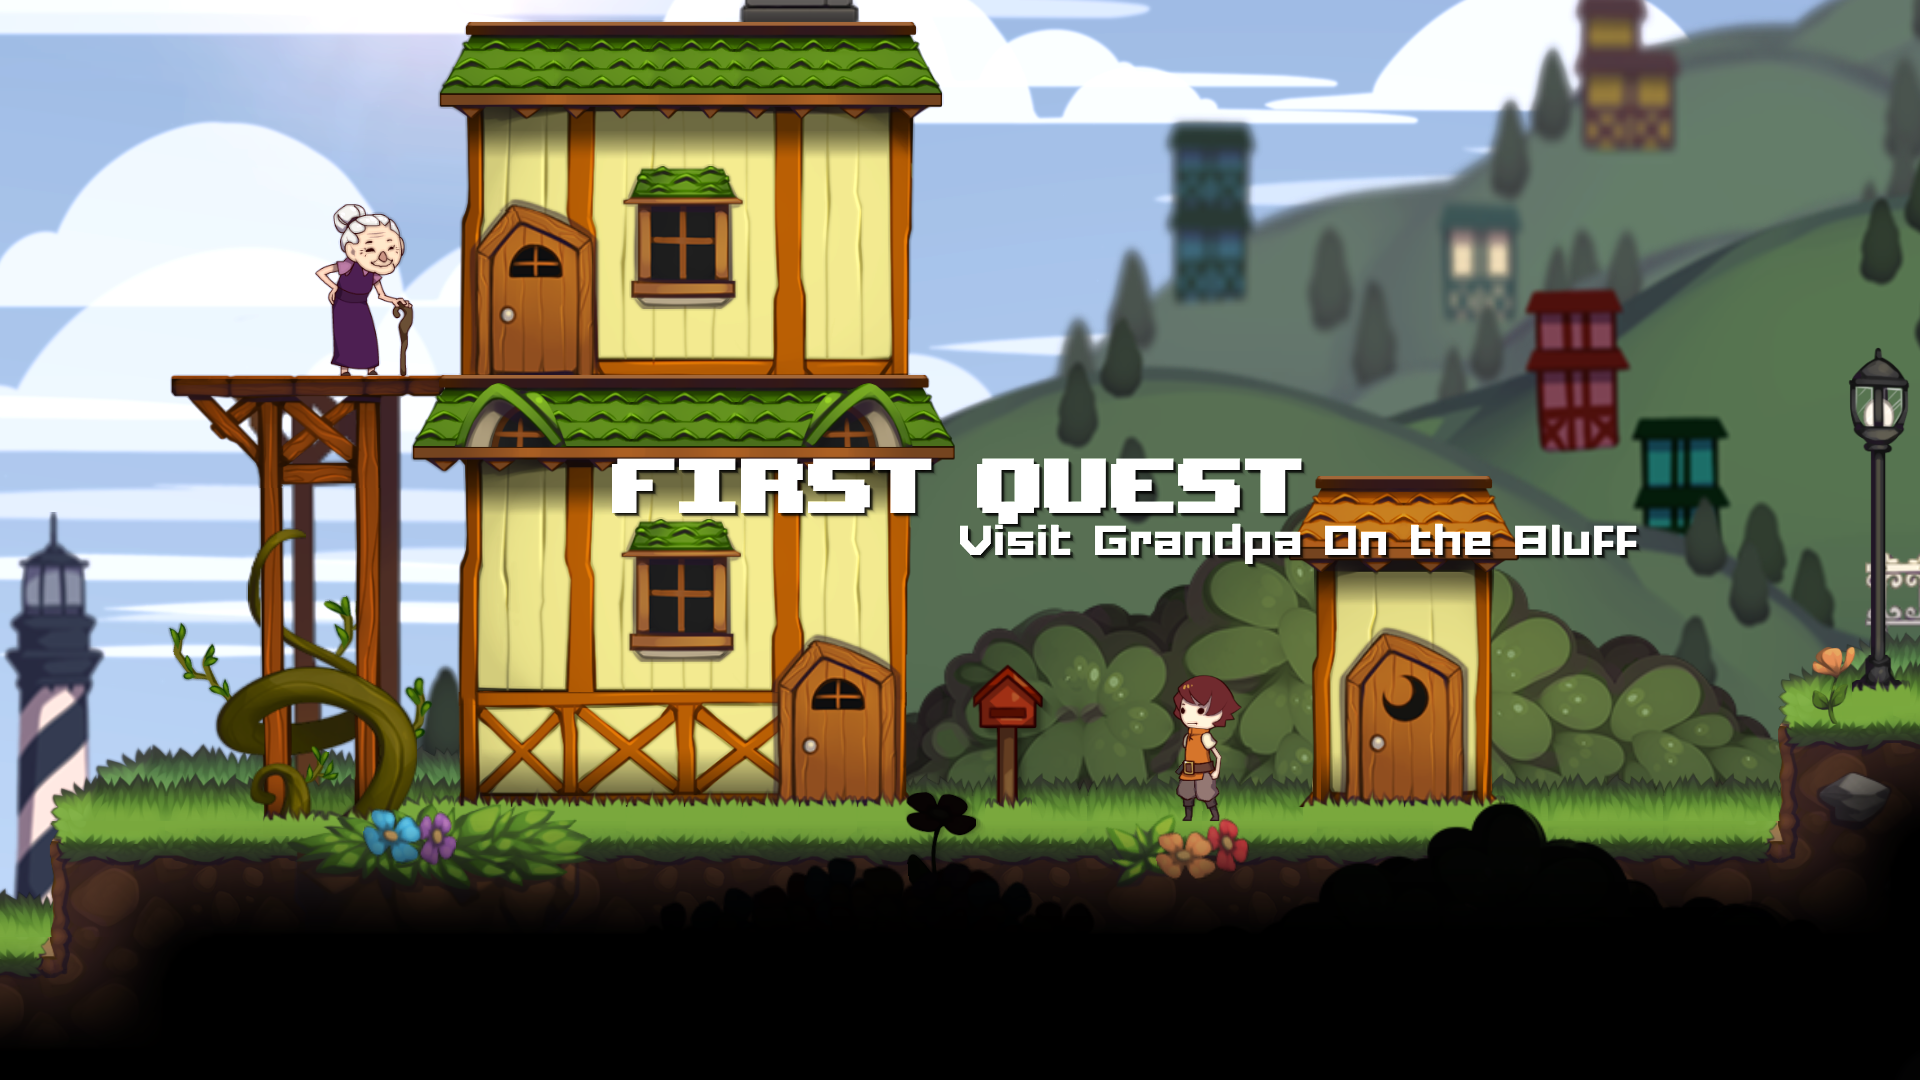 Taw first quest 2